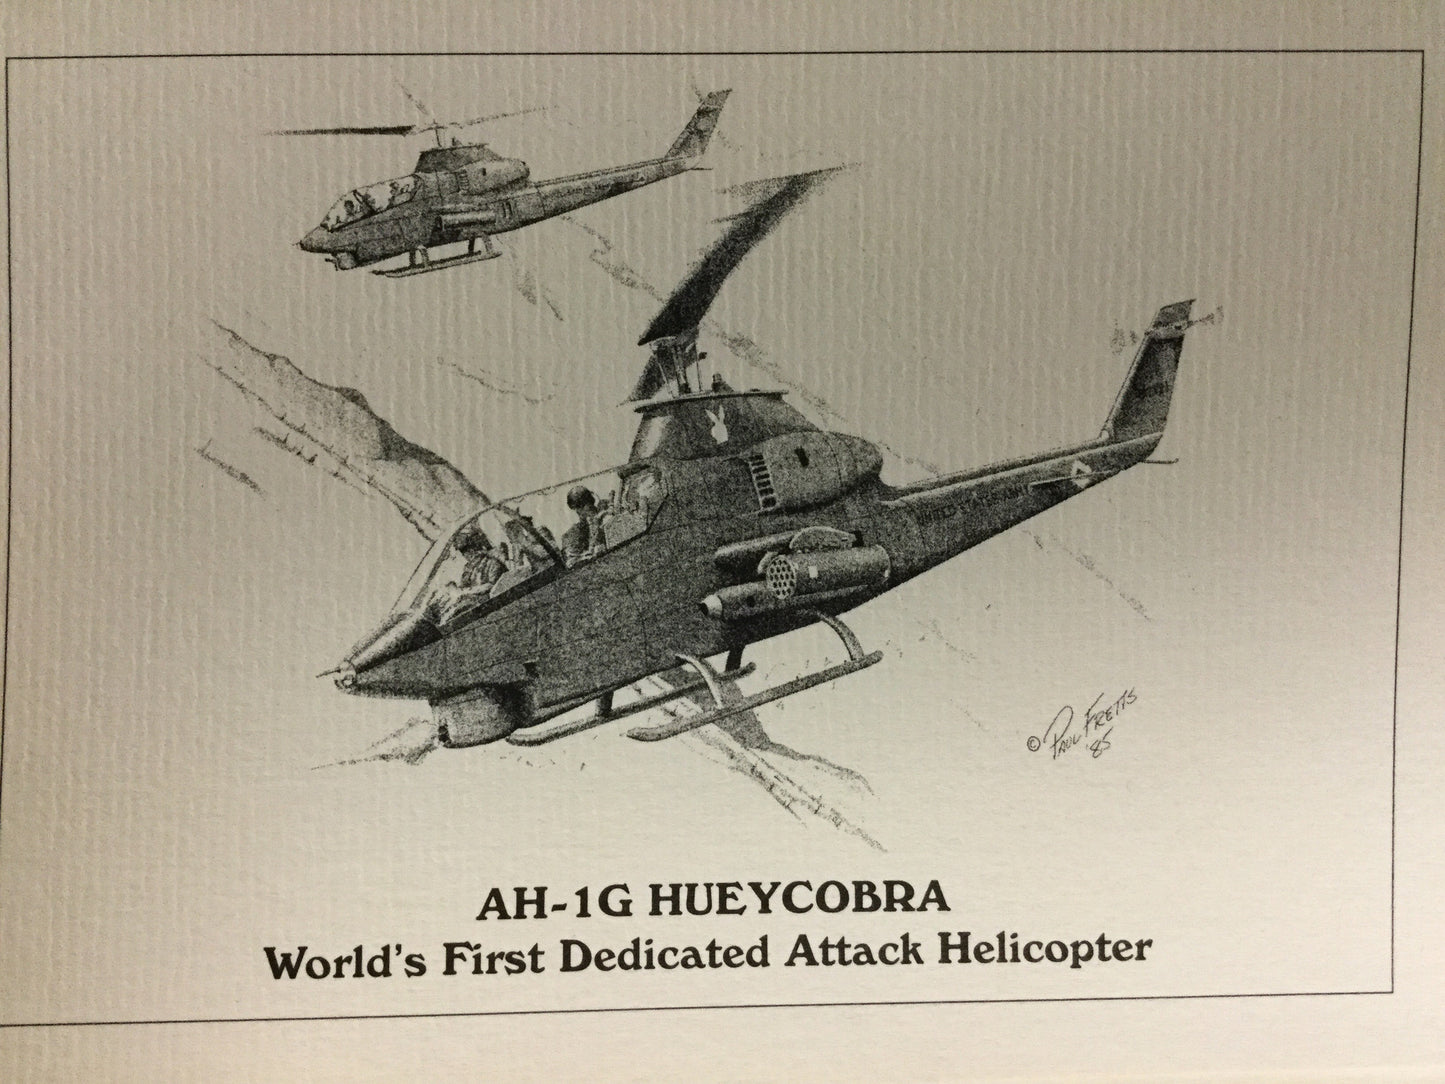 cobra helicopter drawing